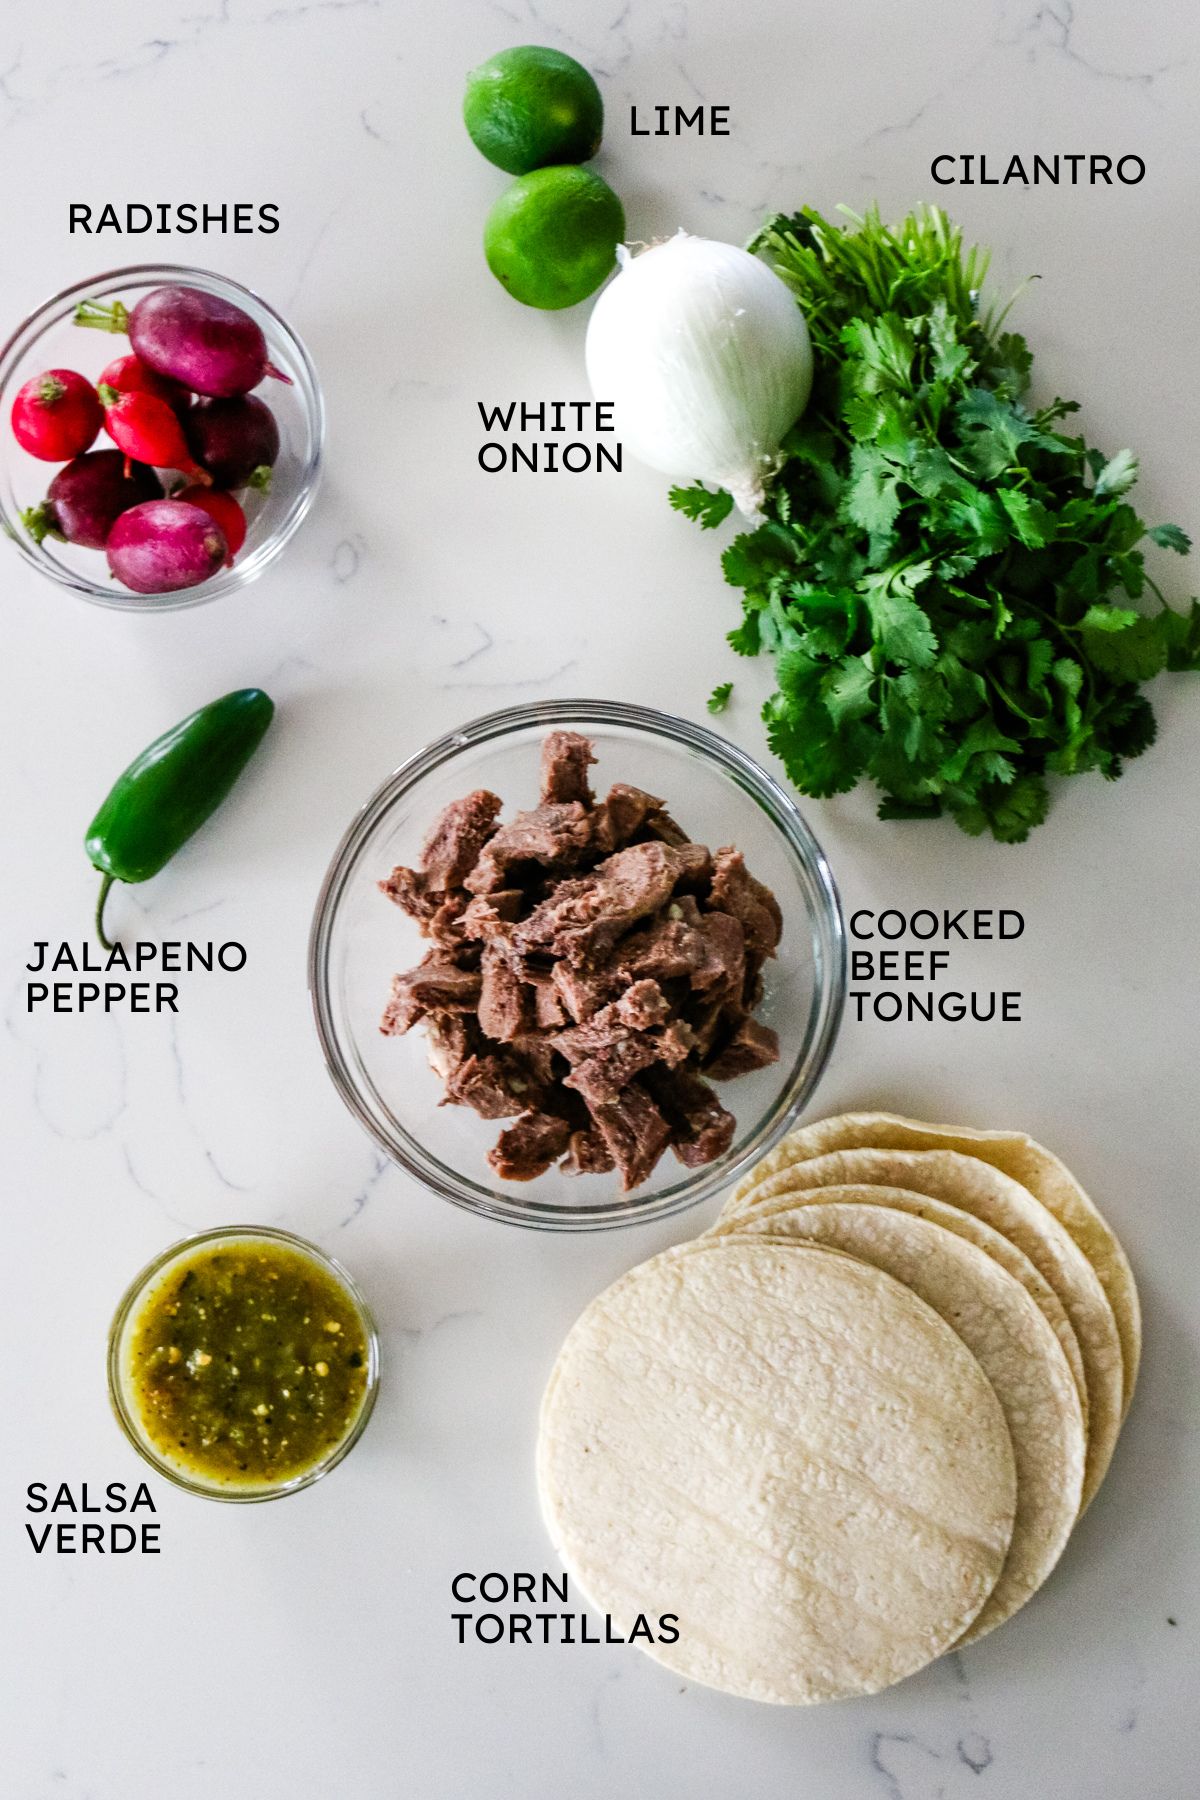 Ingredients on a white counter to make beef tacos, including cilantro, lime, radishes, pepper, beef tongue, salsa and corn.